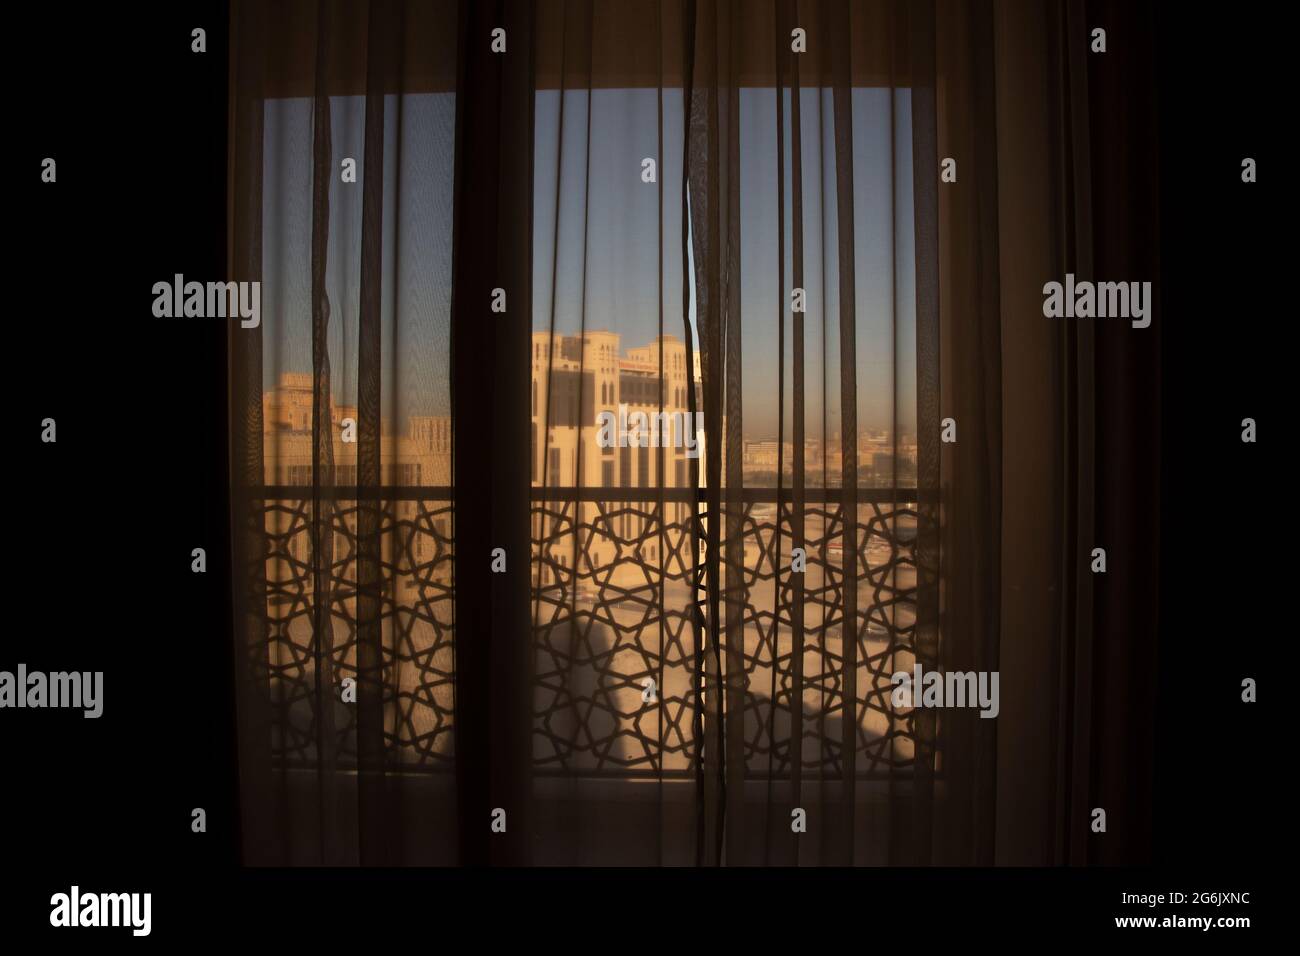 Seeing the early morning sunshine through the curtains in Dubai. Stock Photo